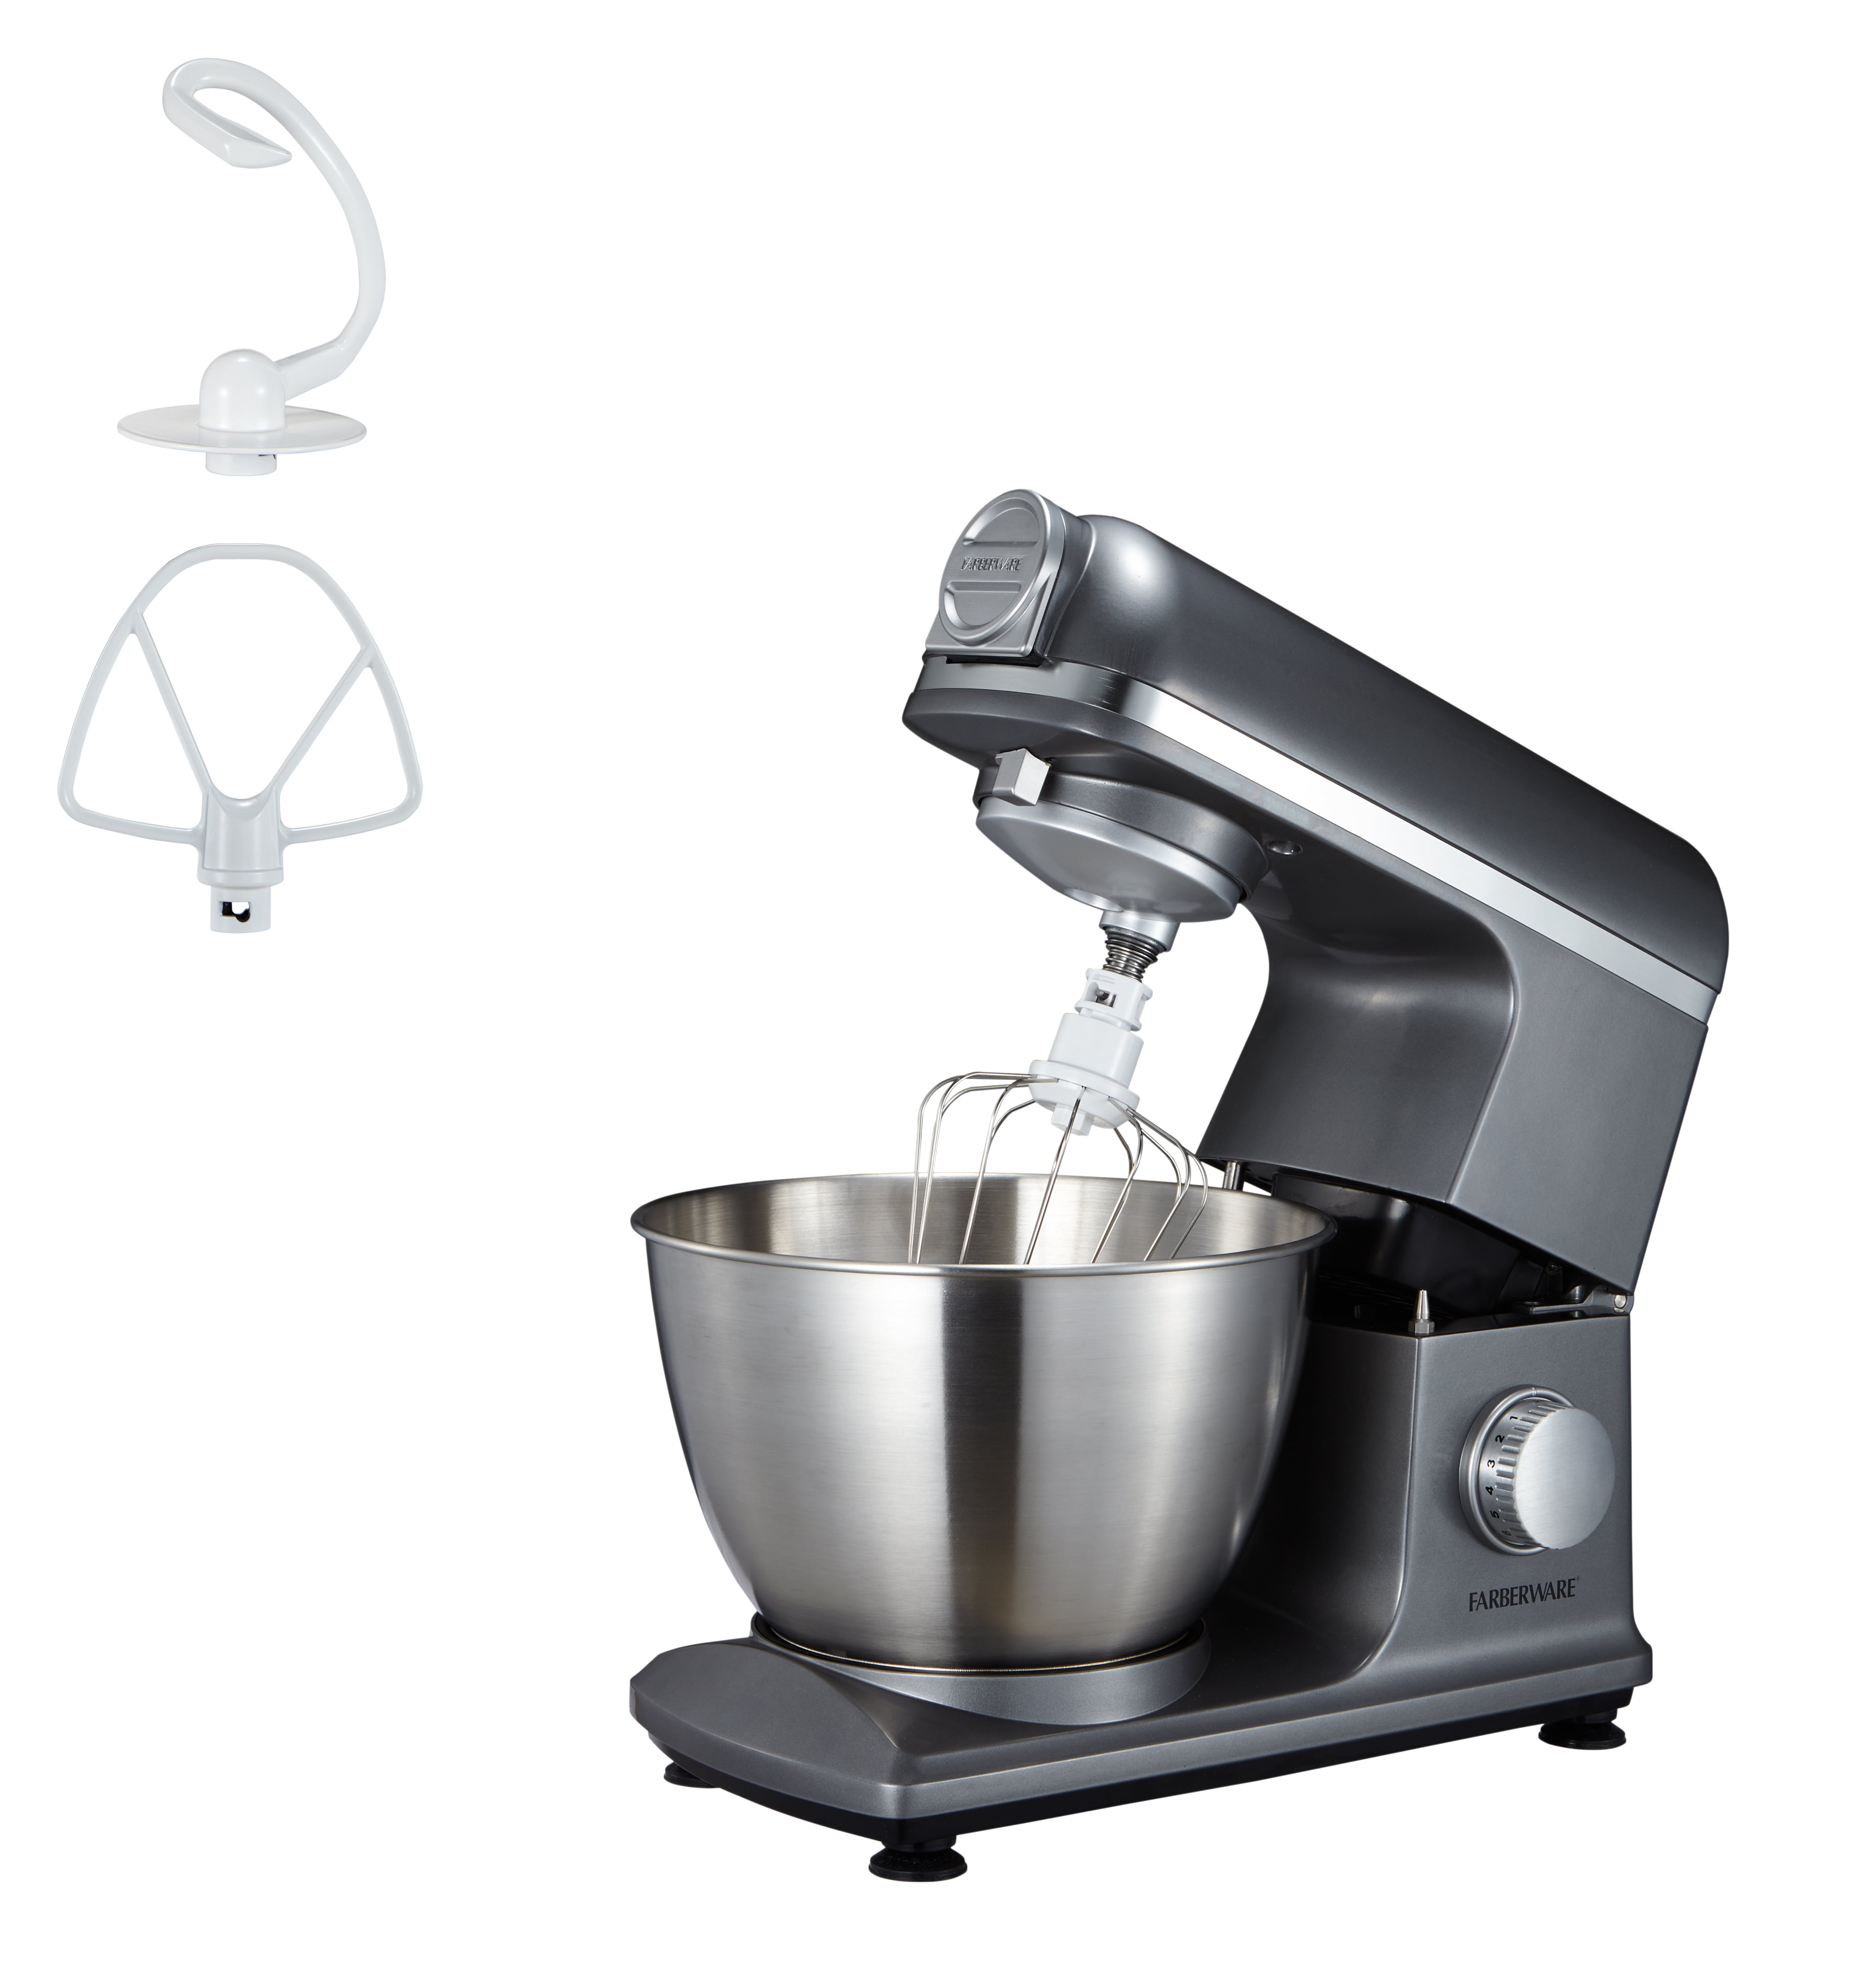 Farberware 4.7 Qt 600W Stand Mixer - SM3481RBG for sale online